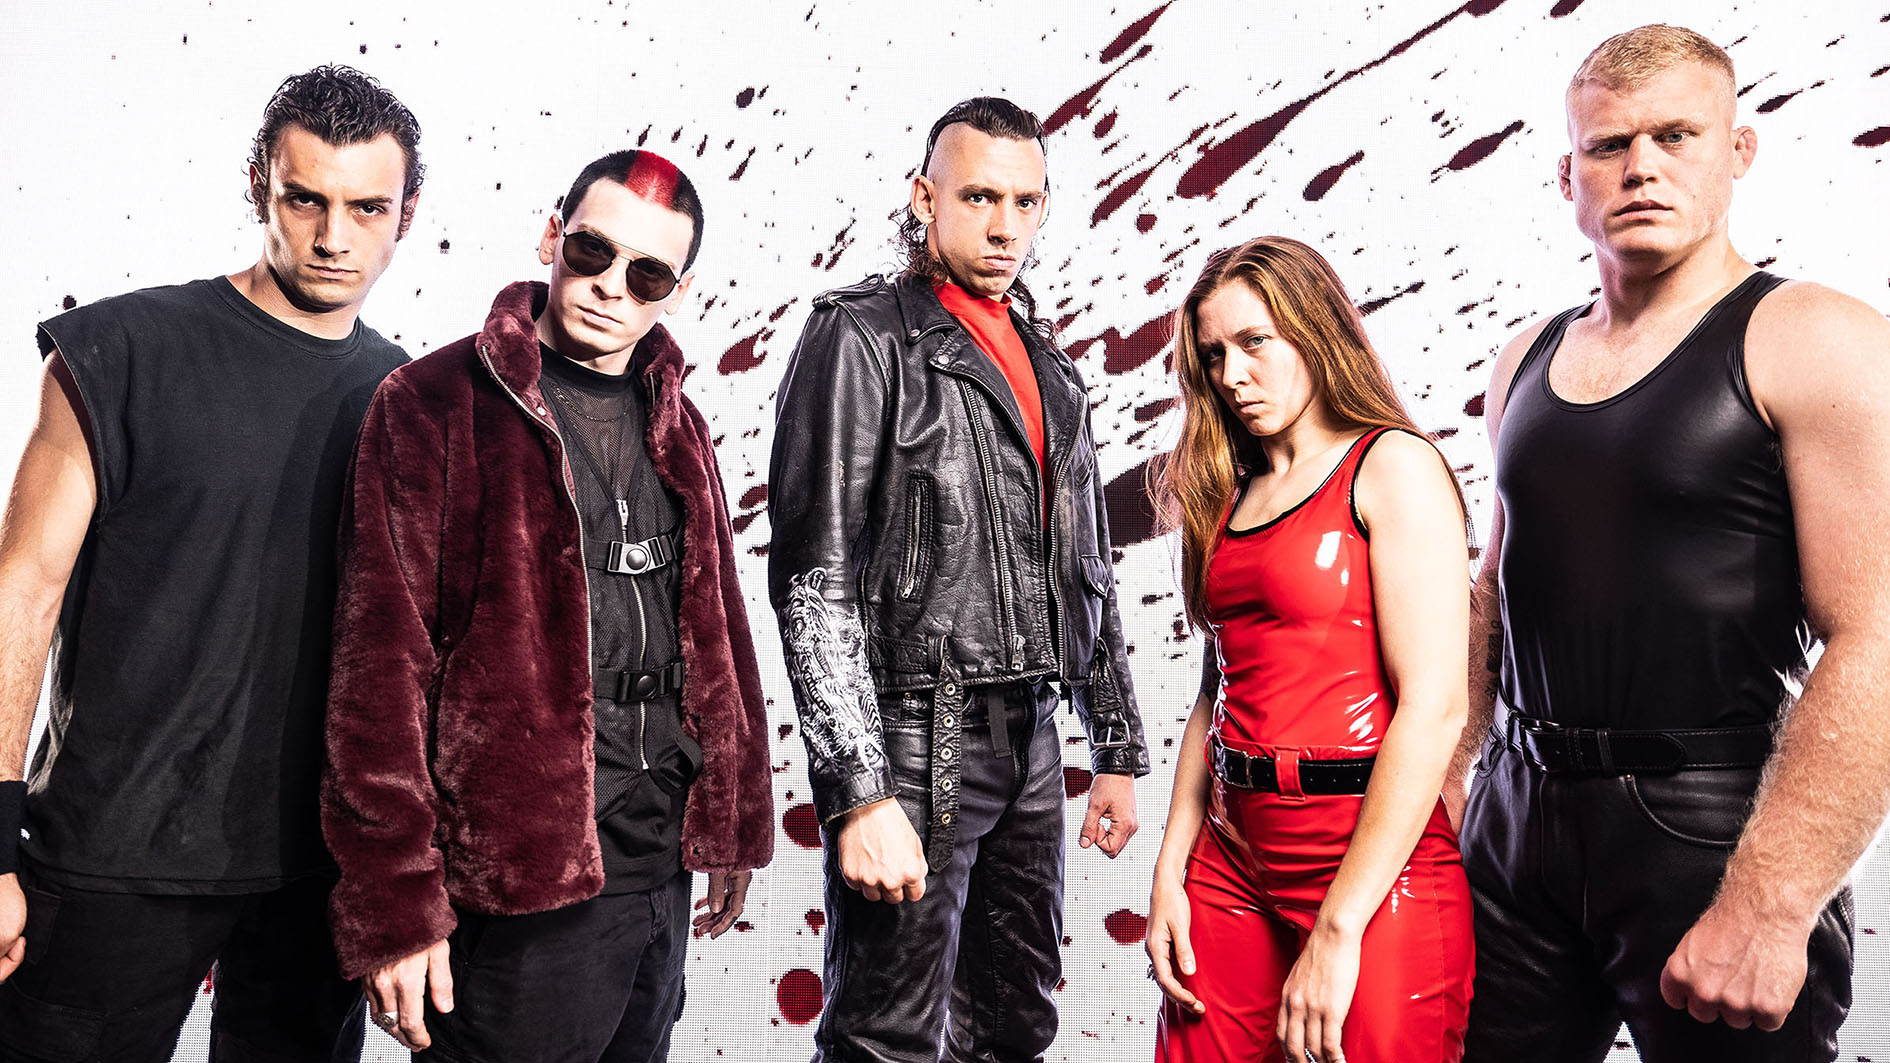 code-orange-are-out-for-blood-as-they-debut-savage-new-single-guitar